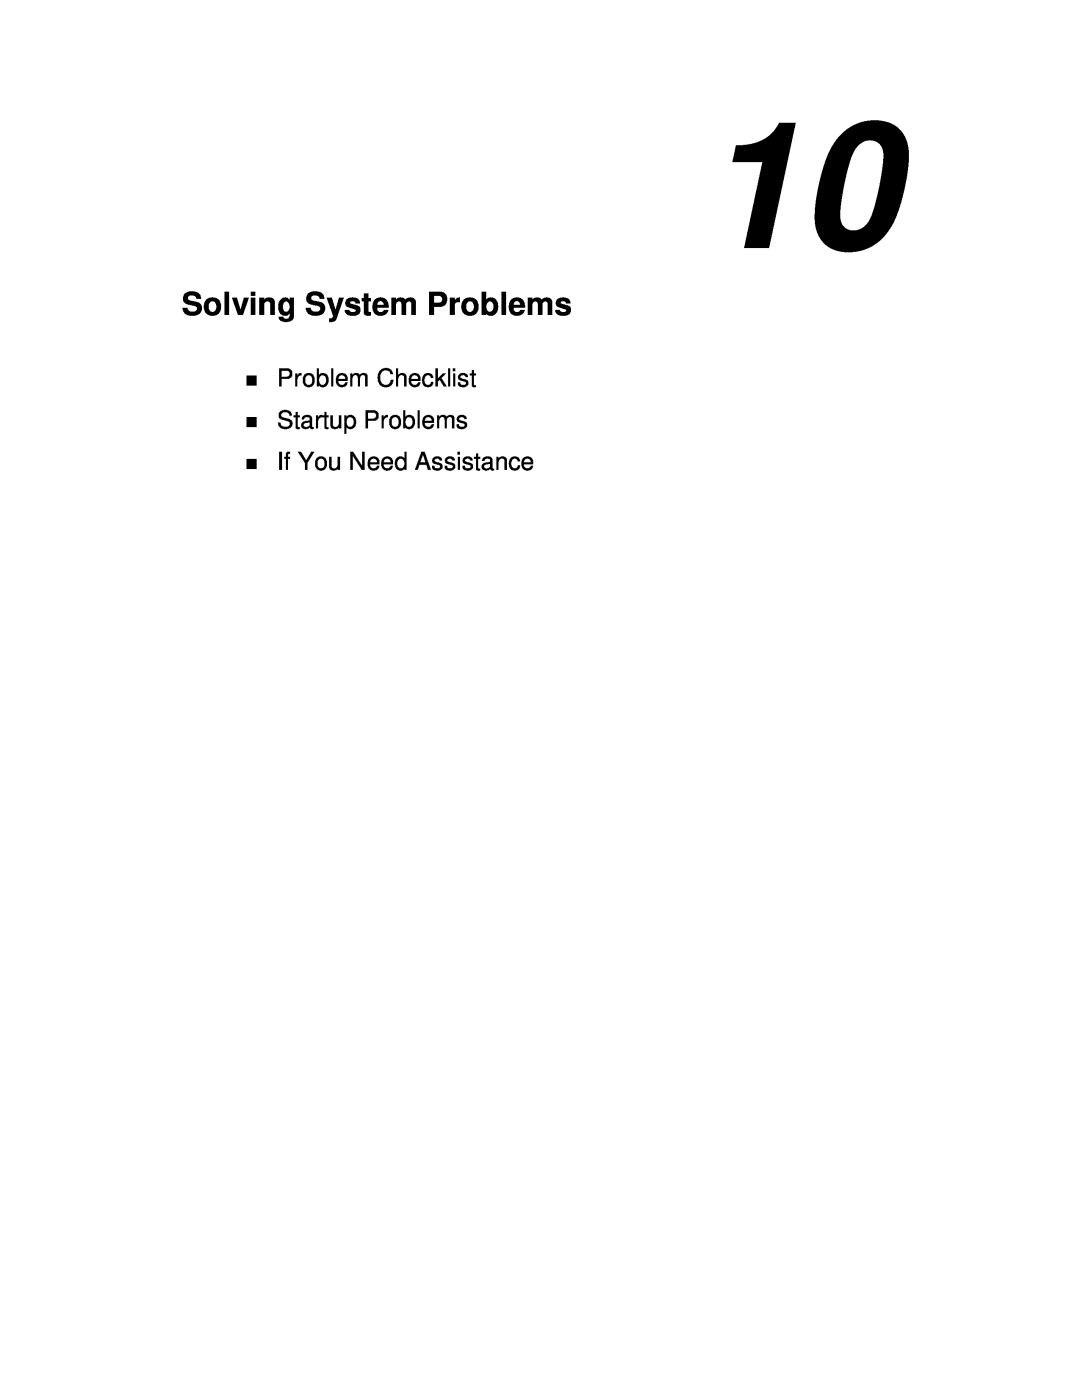 NEC VXi manual Solving System Problems, Problem Checklist Startup Problems, If You Need Assistance 